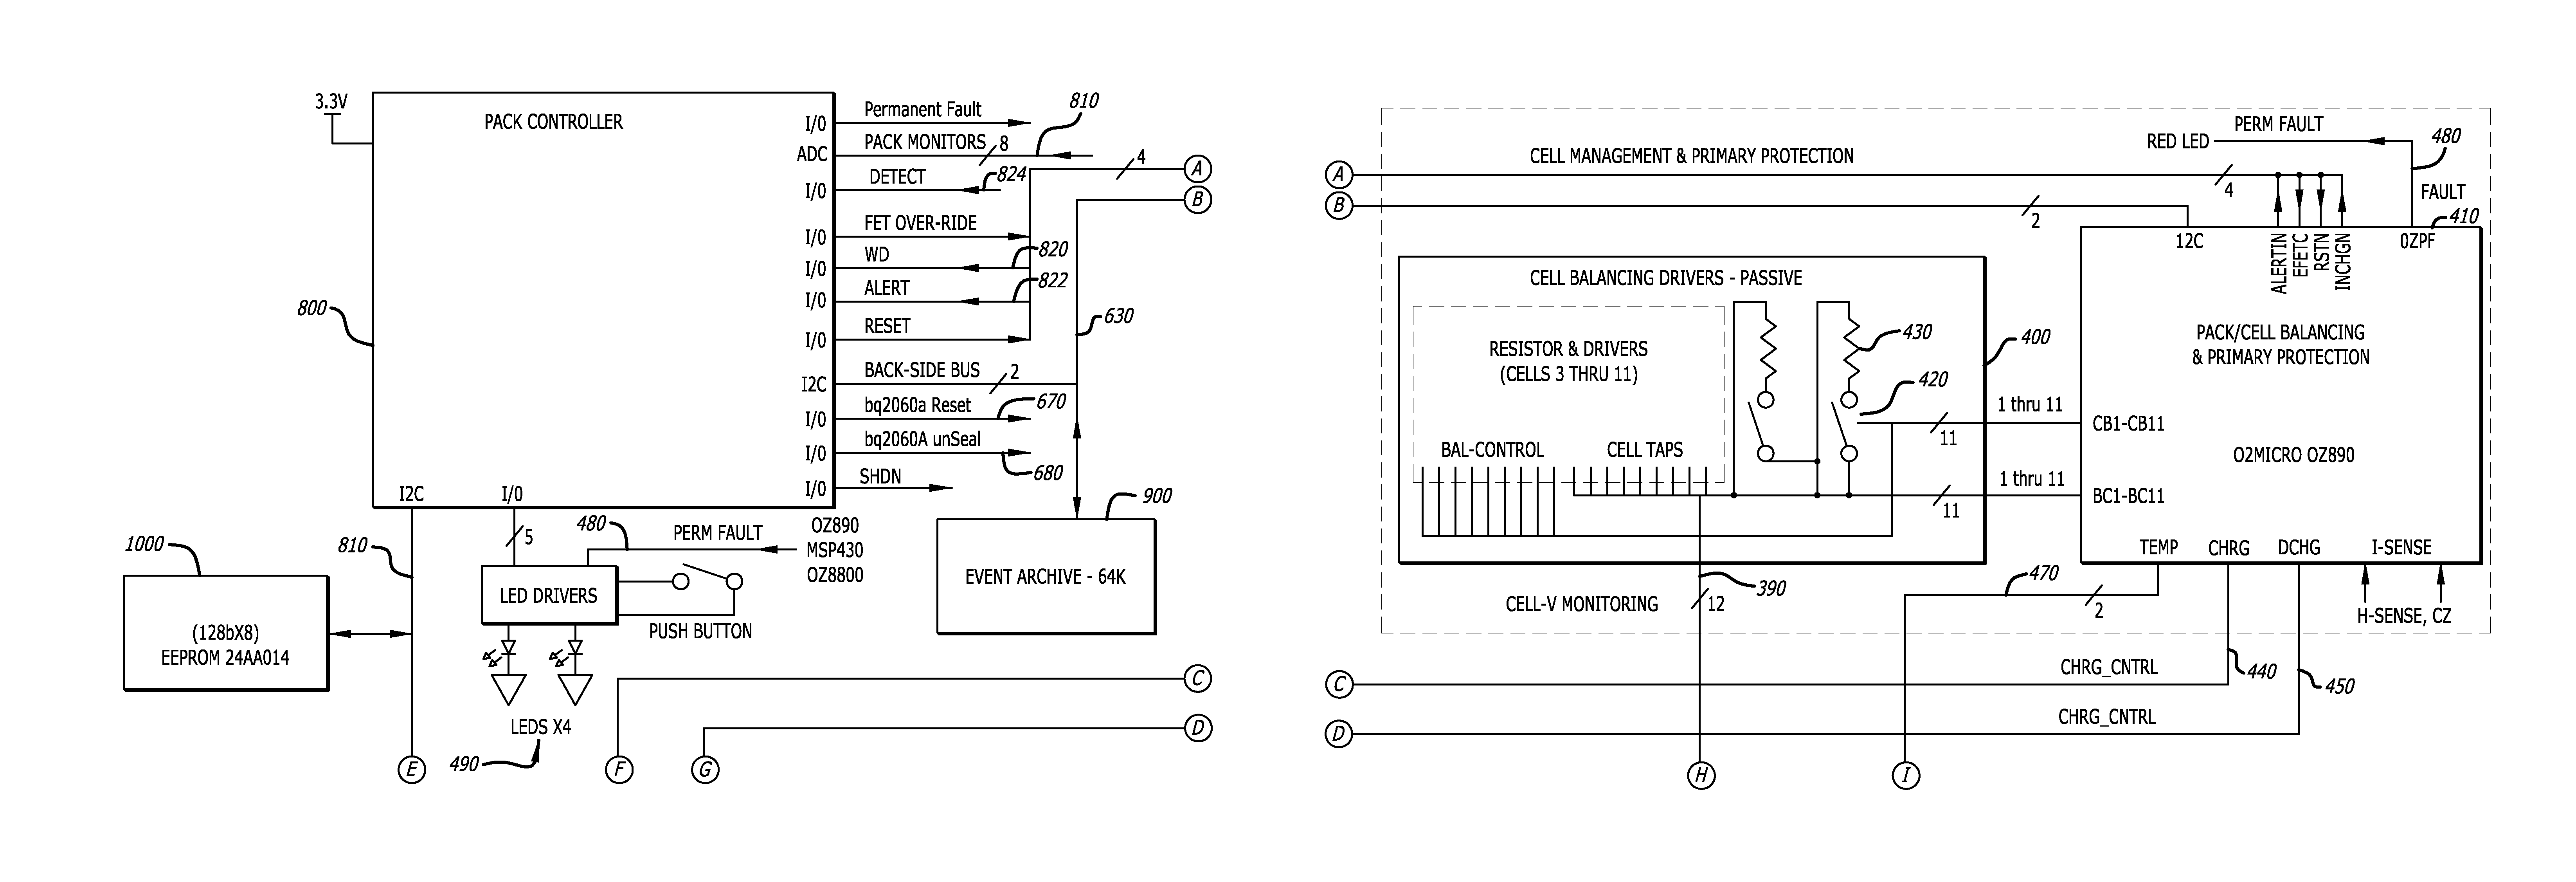 Battery management system for control of lithium power cells